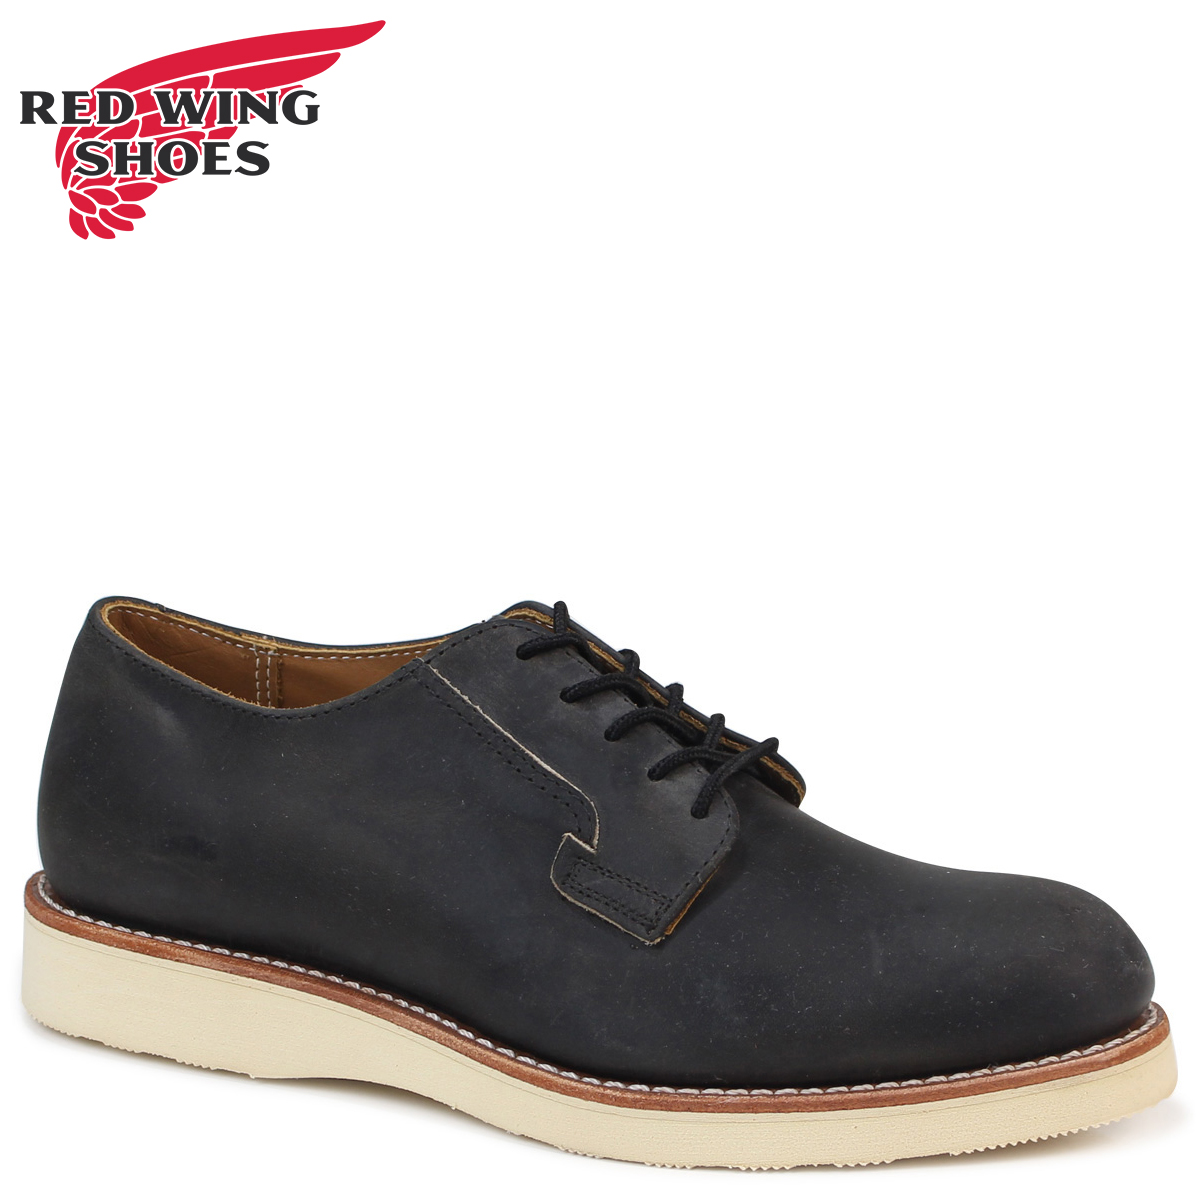 red wing shoes corporate